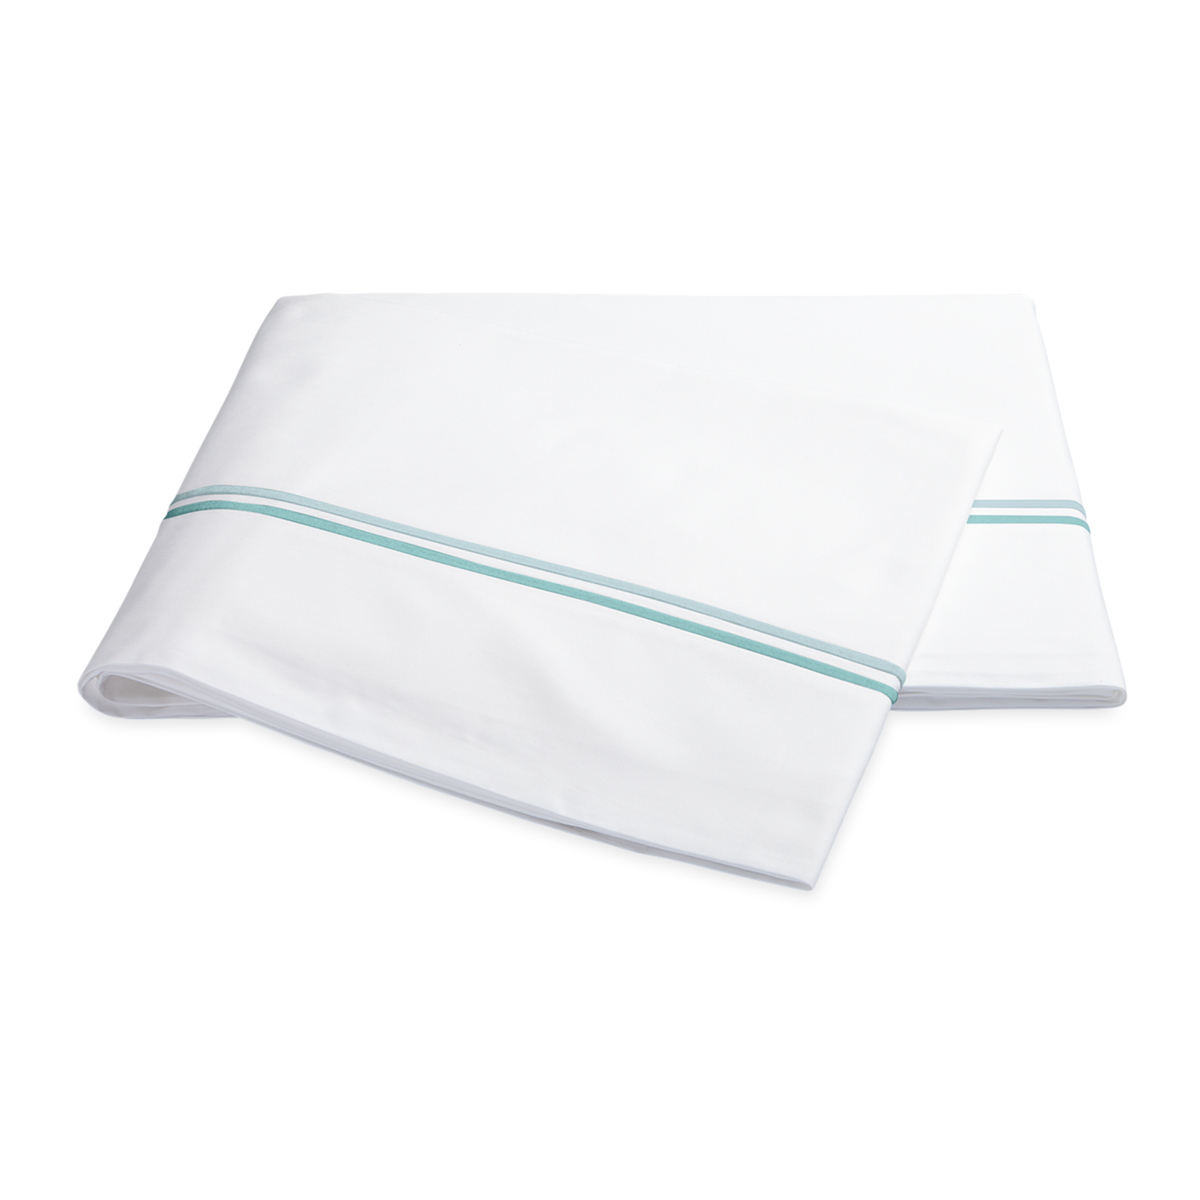 Flat Sheet of Matouk Essex Bedding Collection in Lagoon Color